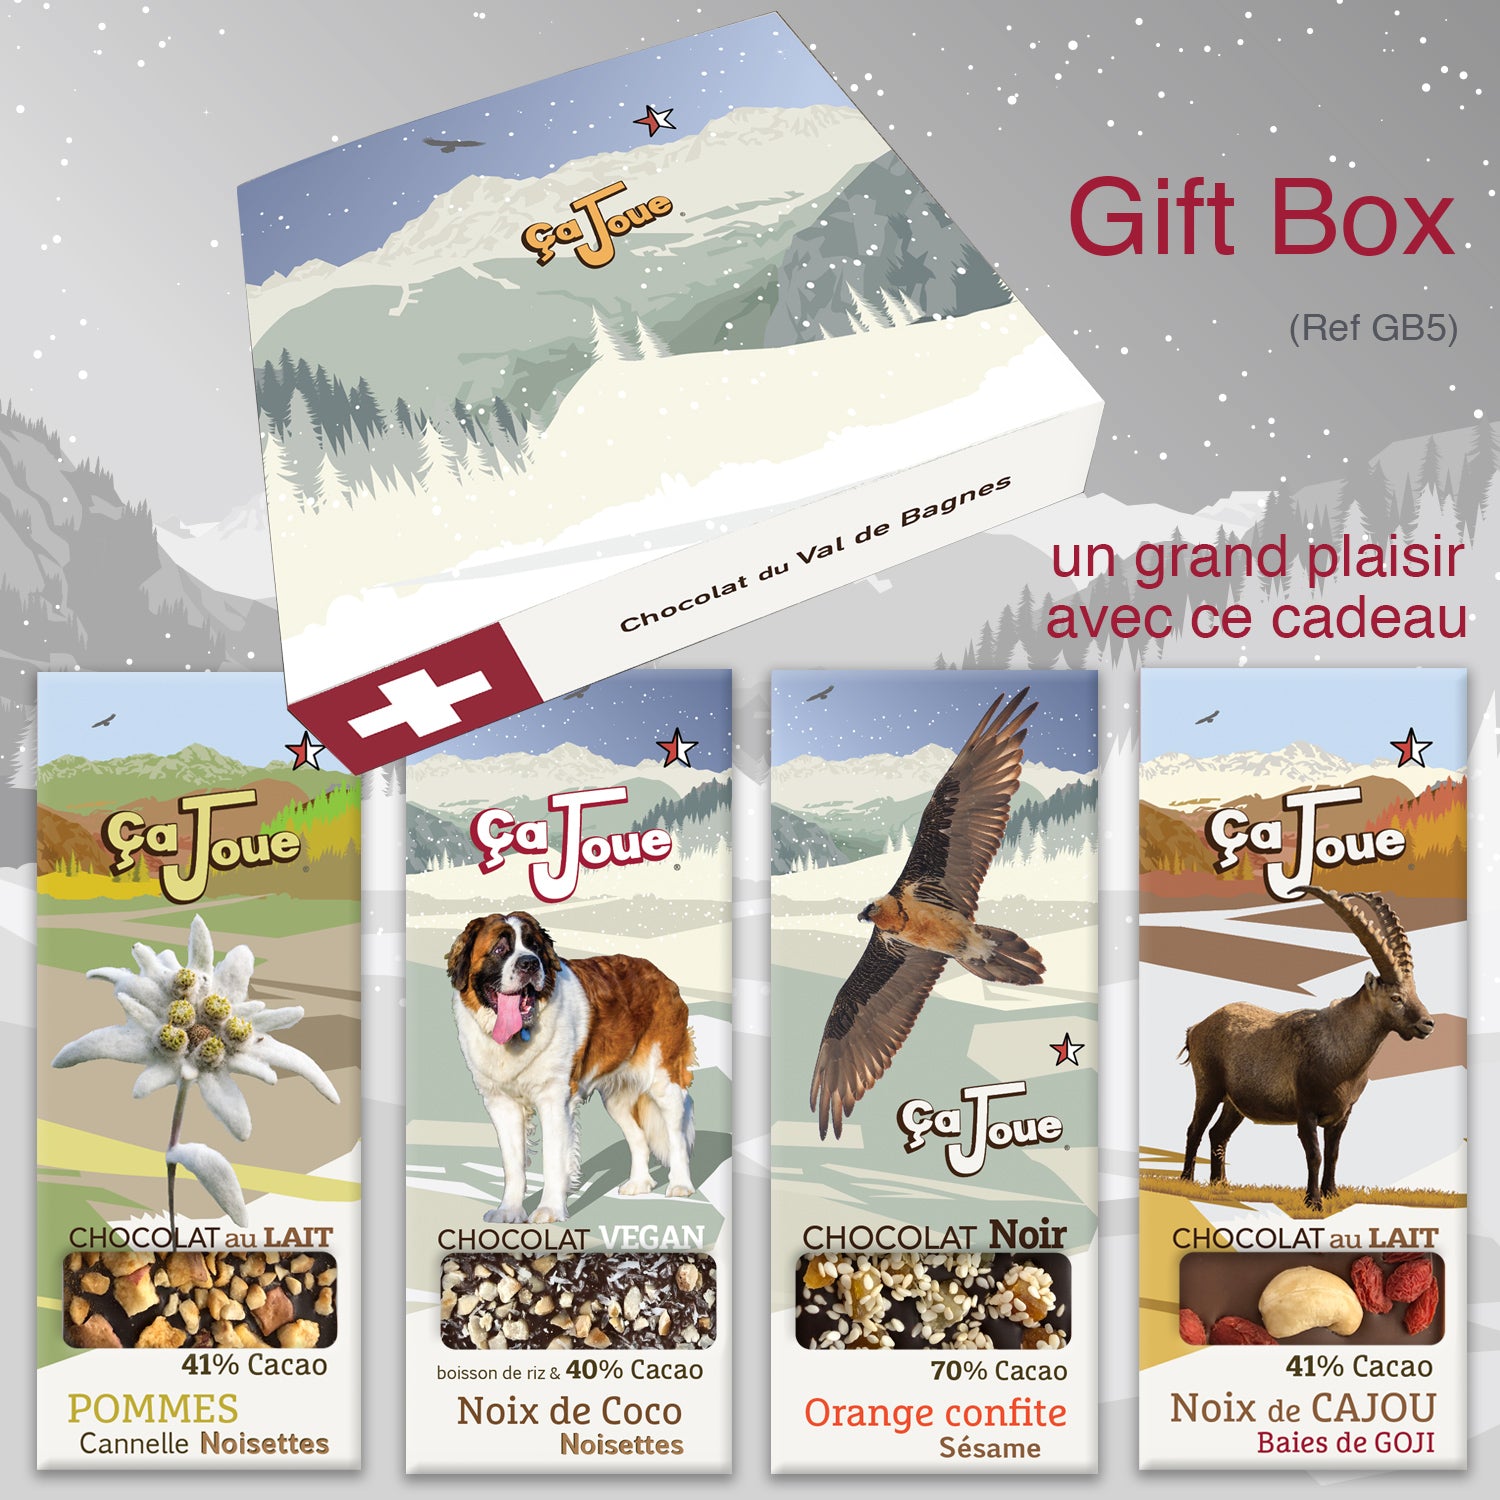 Gift Box (Ref GB5) Chocolate from Val de Bagnes